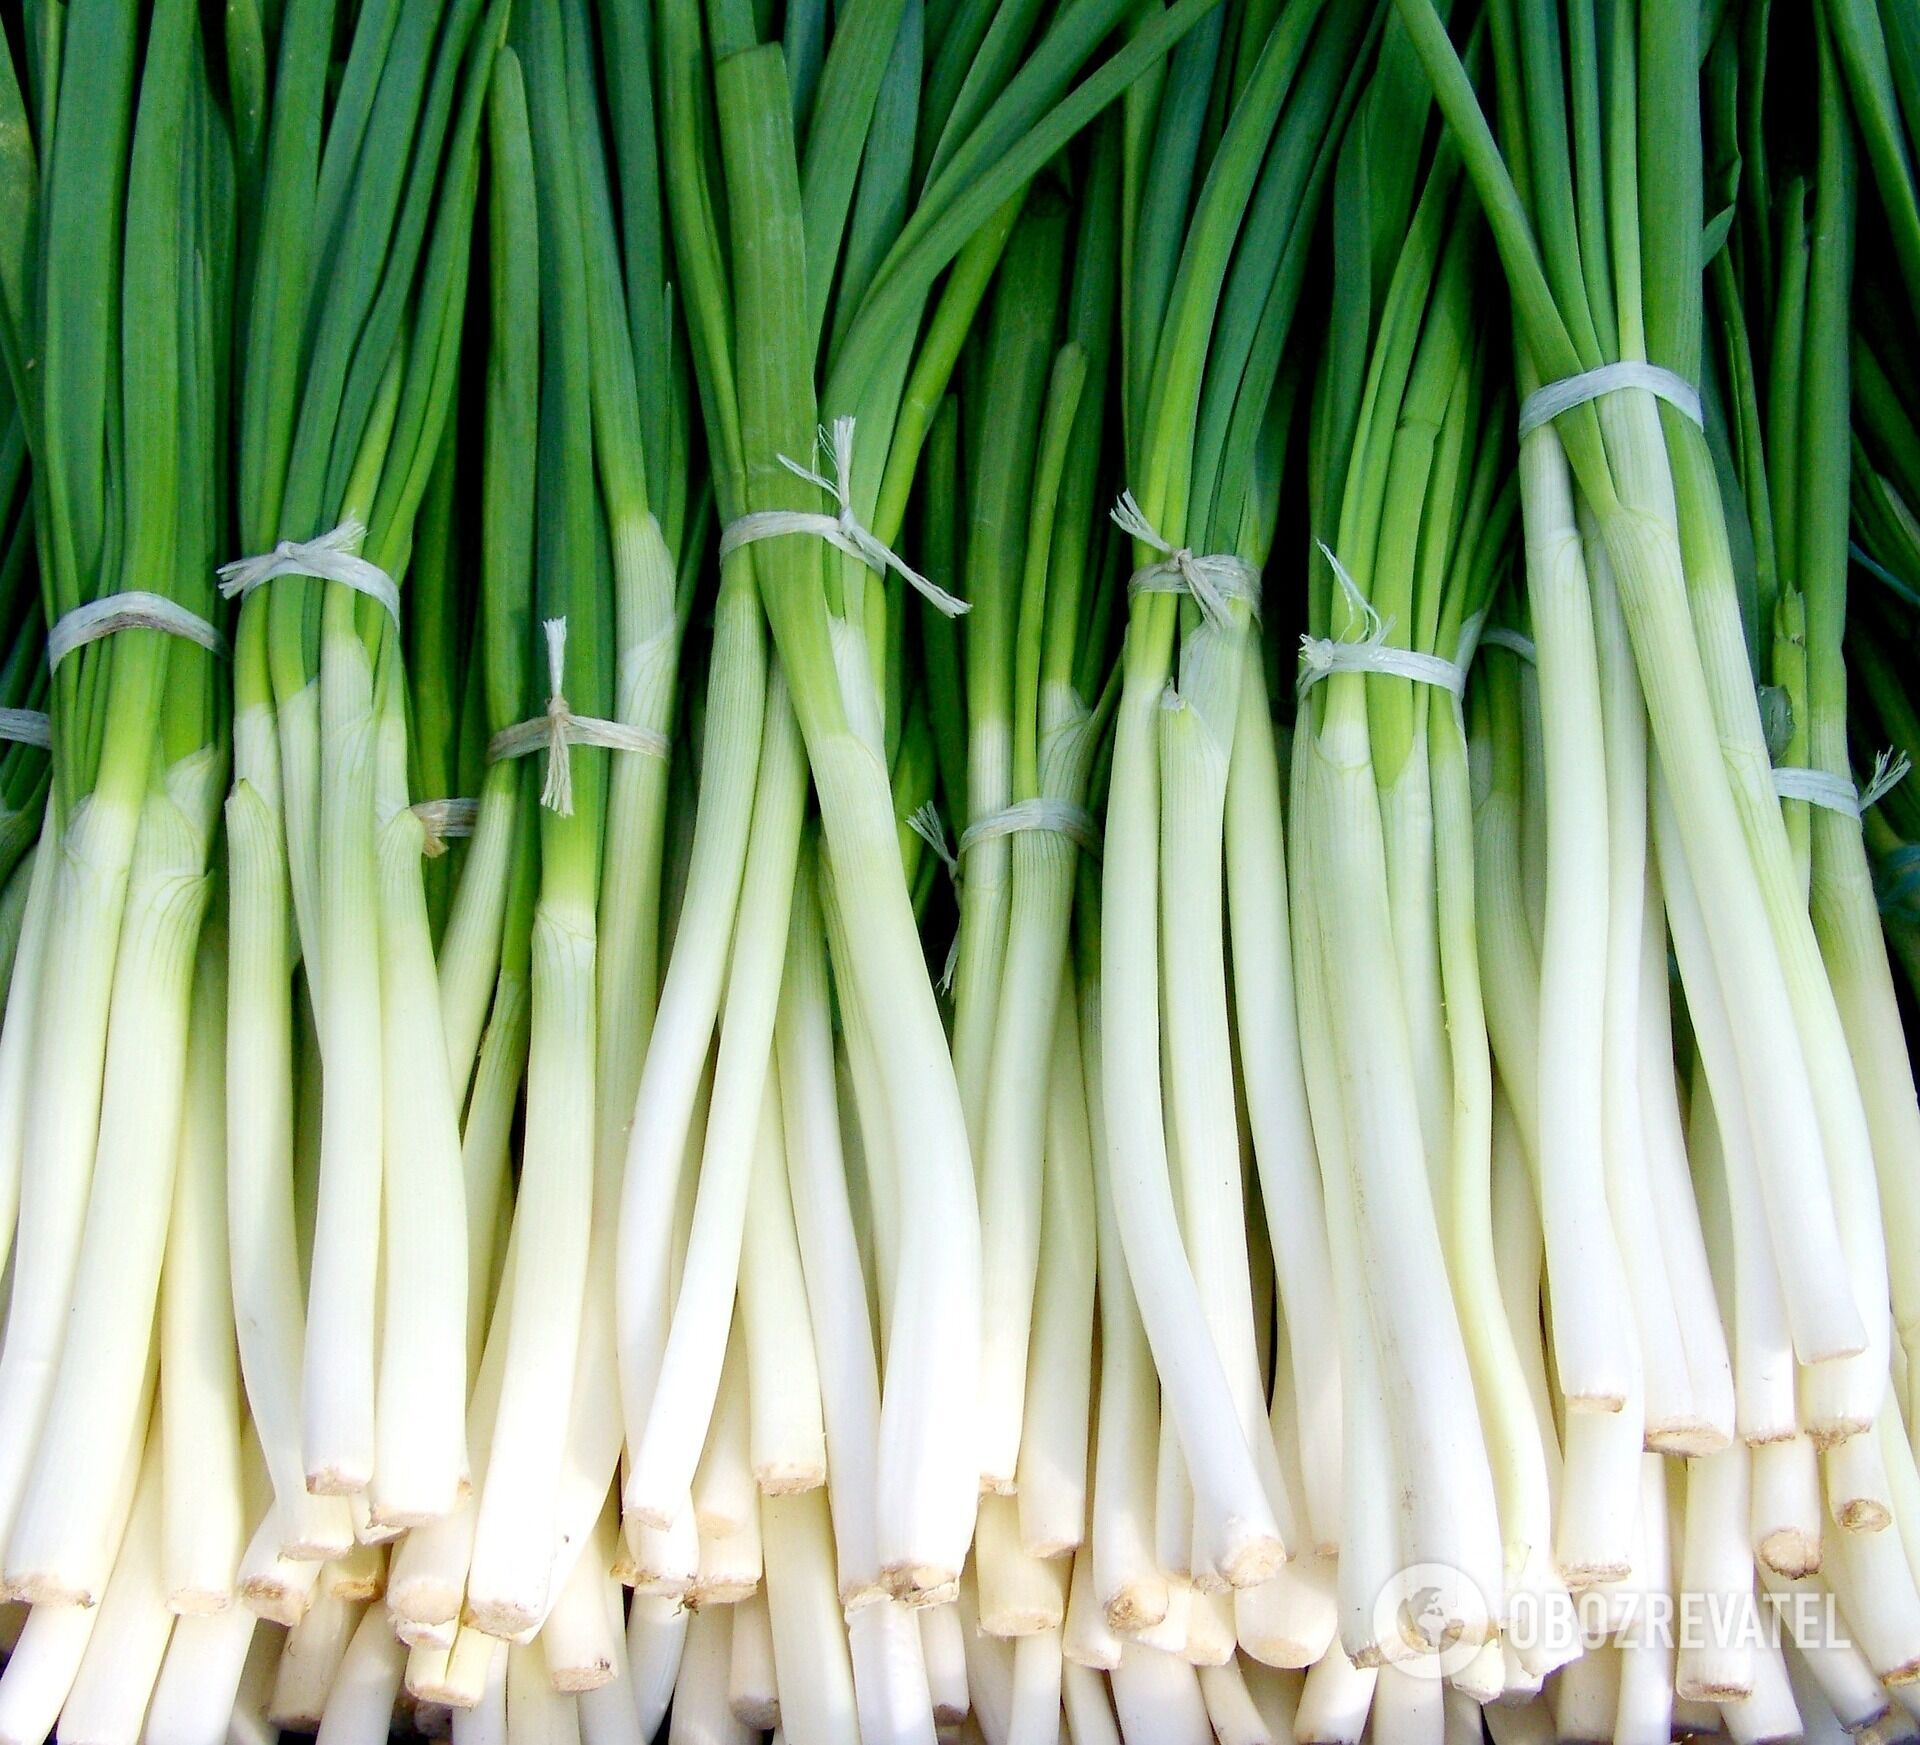 Green onions for the filling